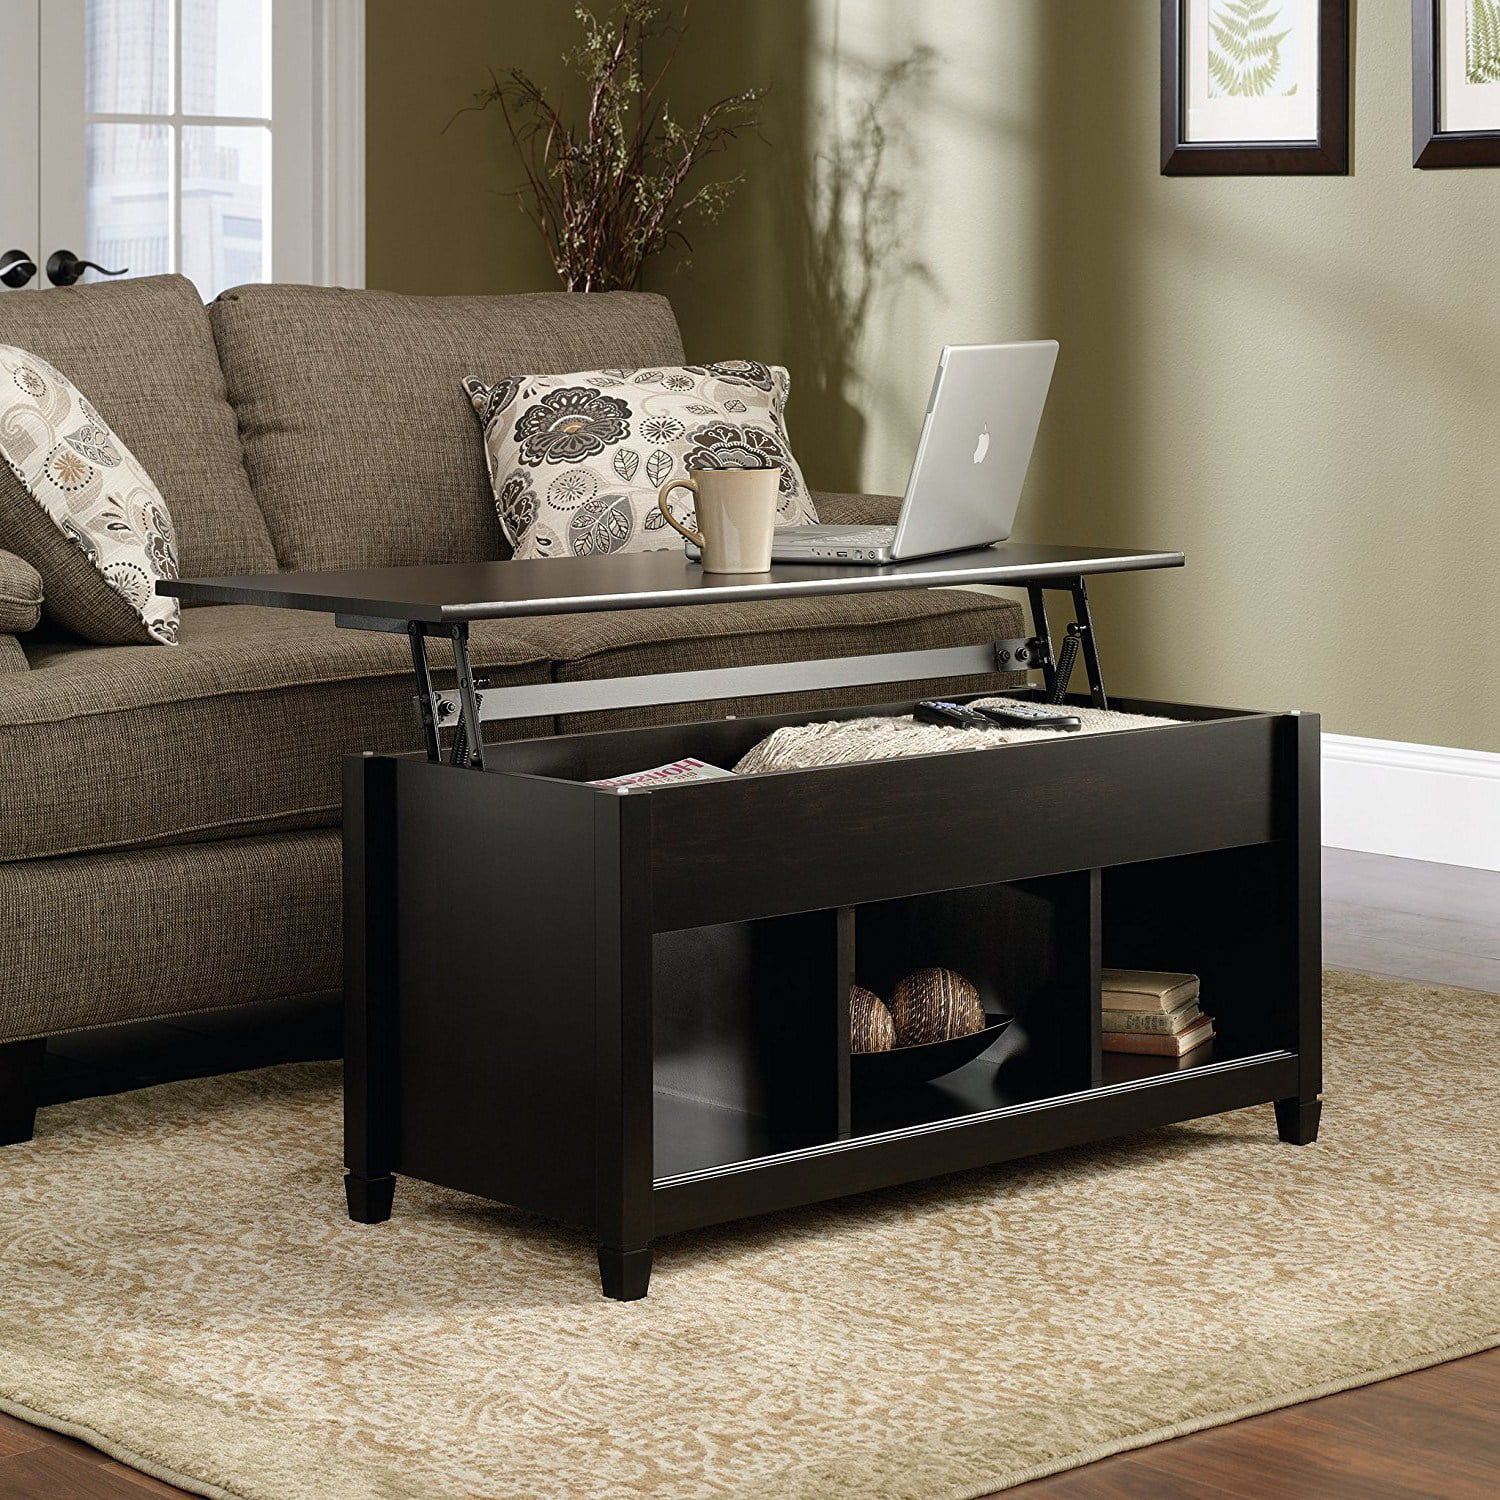 Zimtown Lift Up Top Coffee Table With Hidden Compartment End Rectangle Throughout Coffee Tables With Hidden Compartments (Gallery 15 of 20)